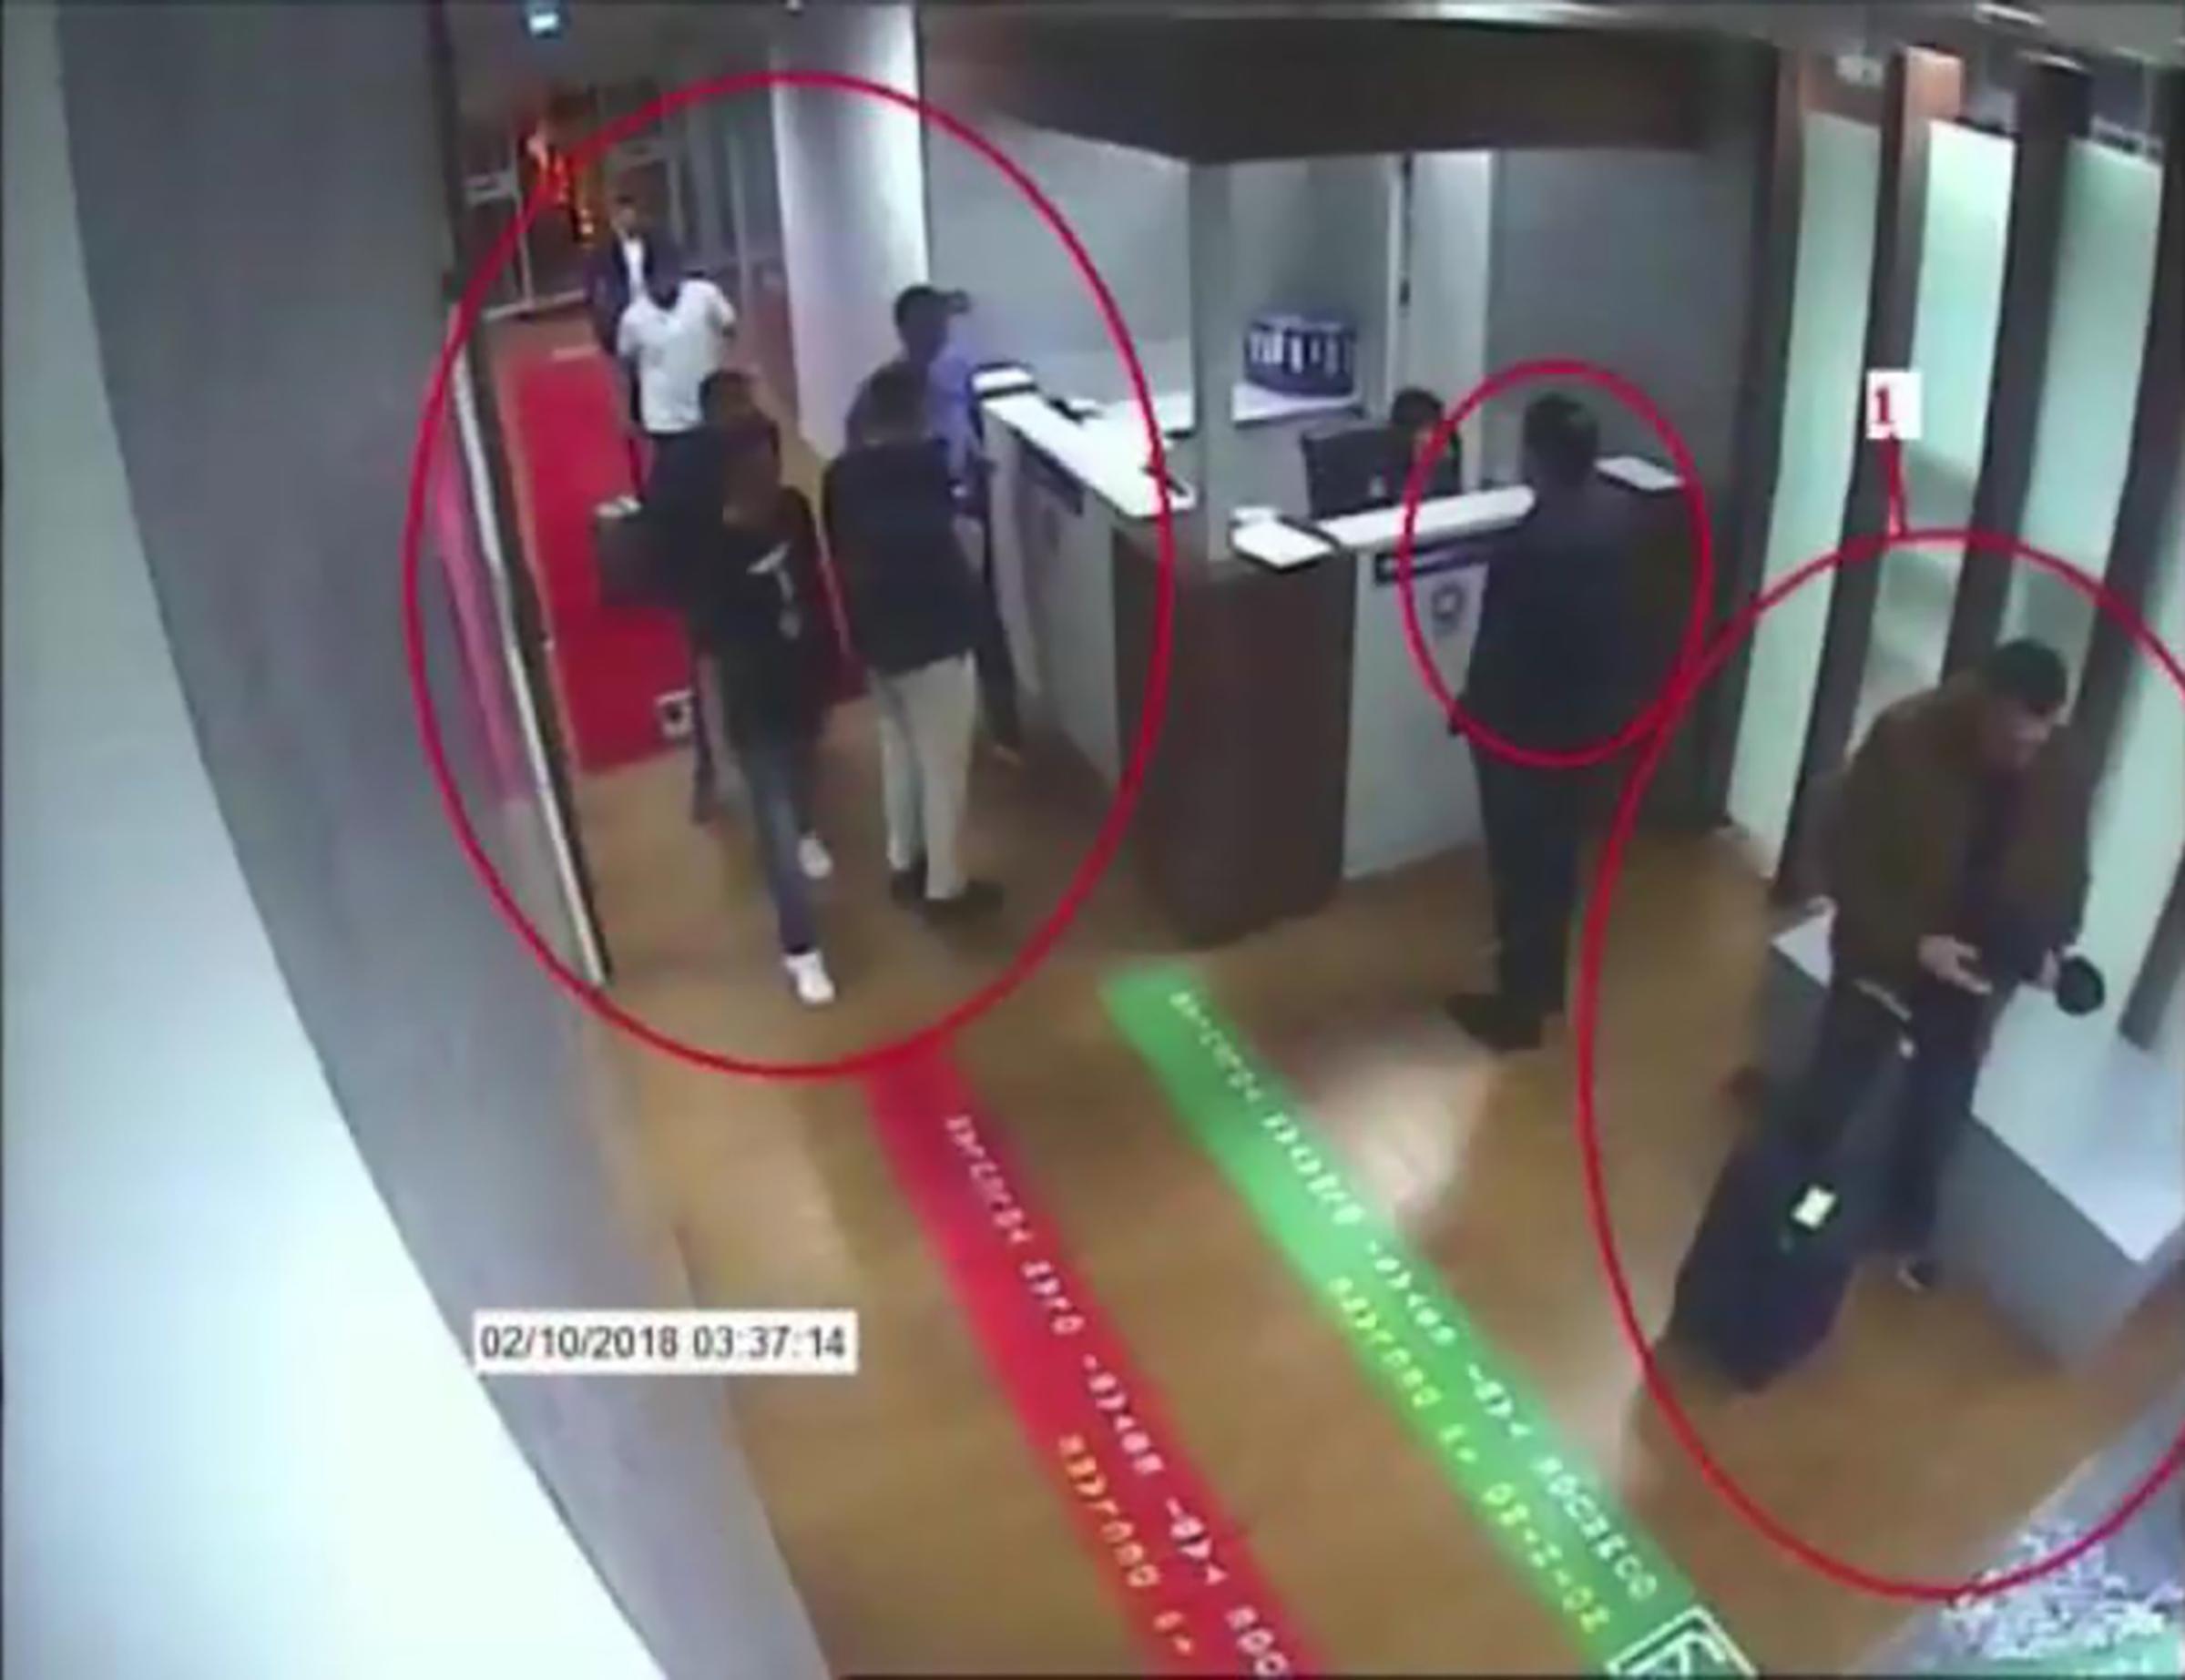 CCTV footage from Oct. 2 shows a Saudi jet at Istanbul’s Ataturk airport, suspects at the airport and Khashoggi entering the Saudi consulate that day